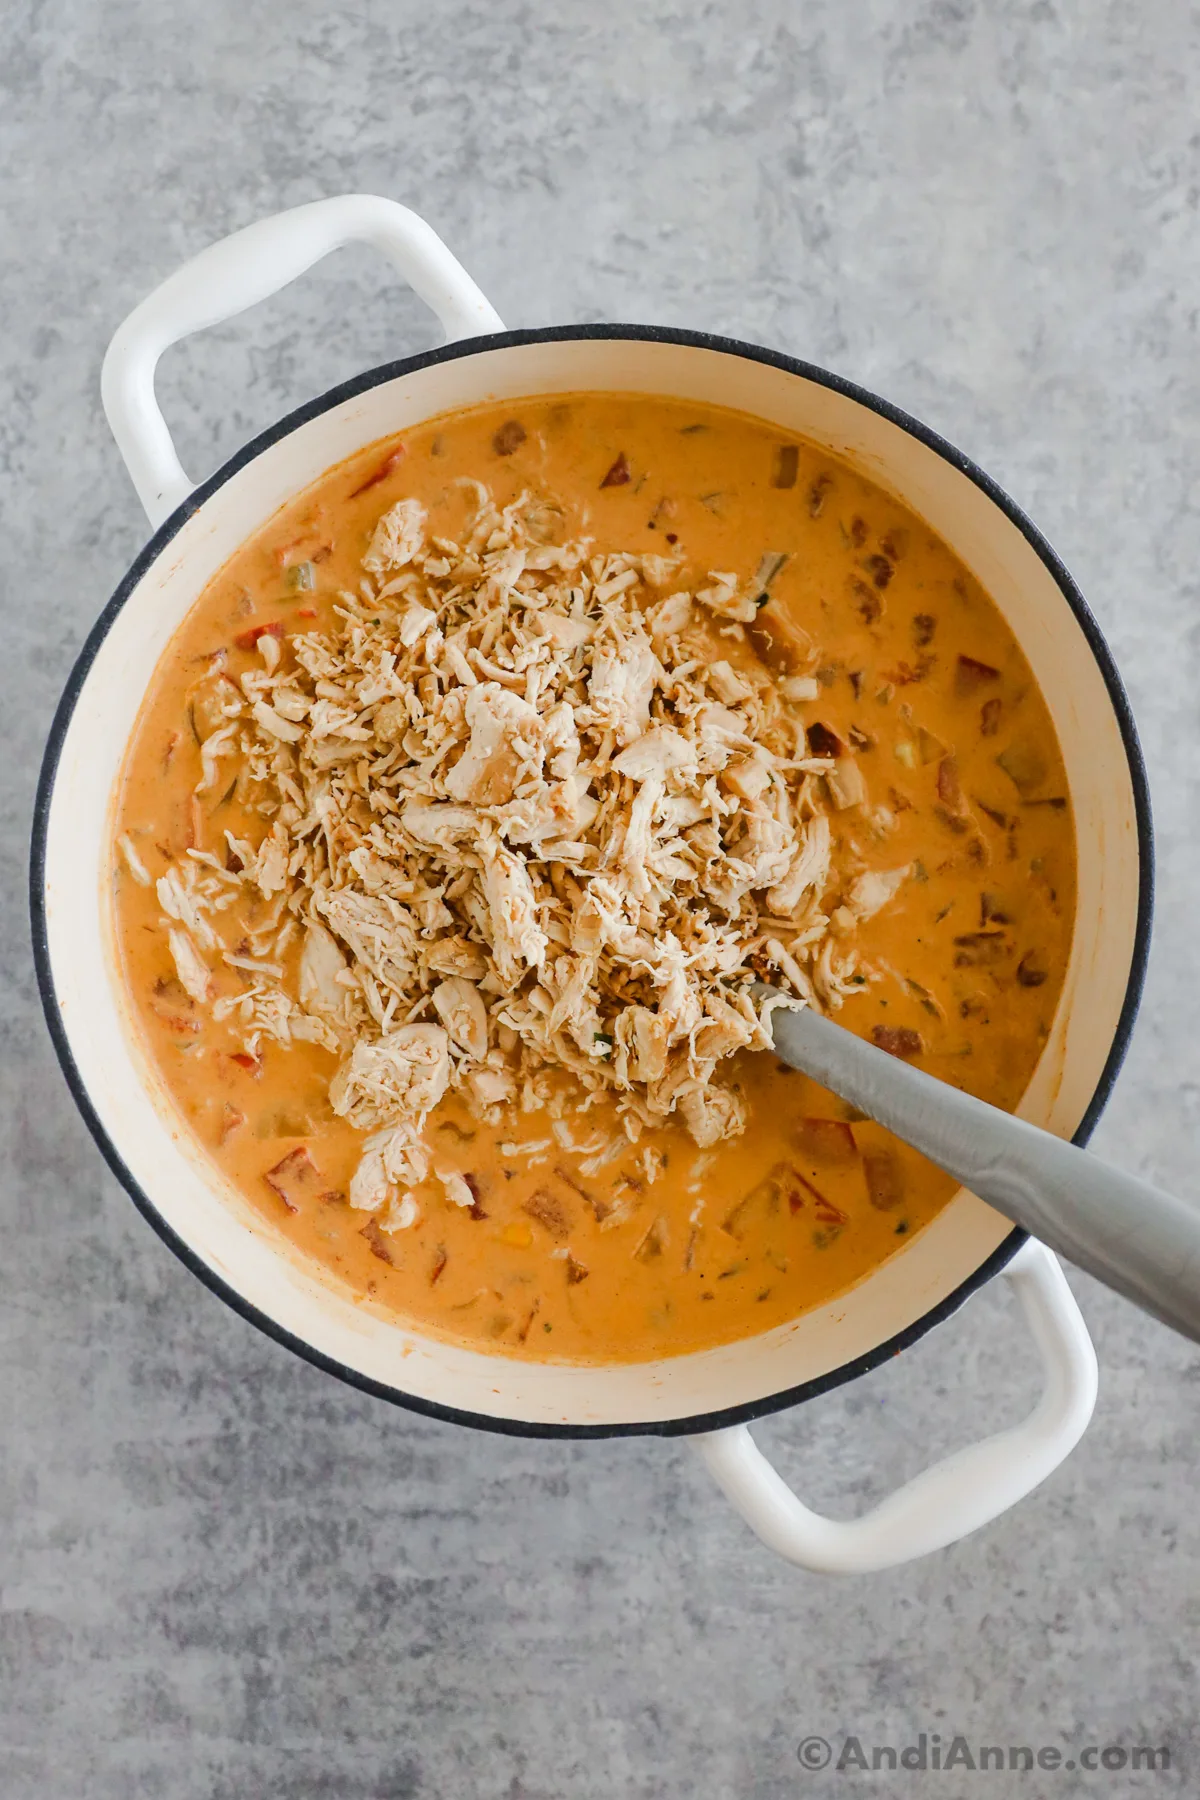 Shredded chicken dumped into a pot of creamy orange colored soup.